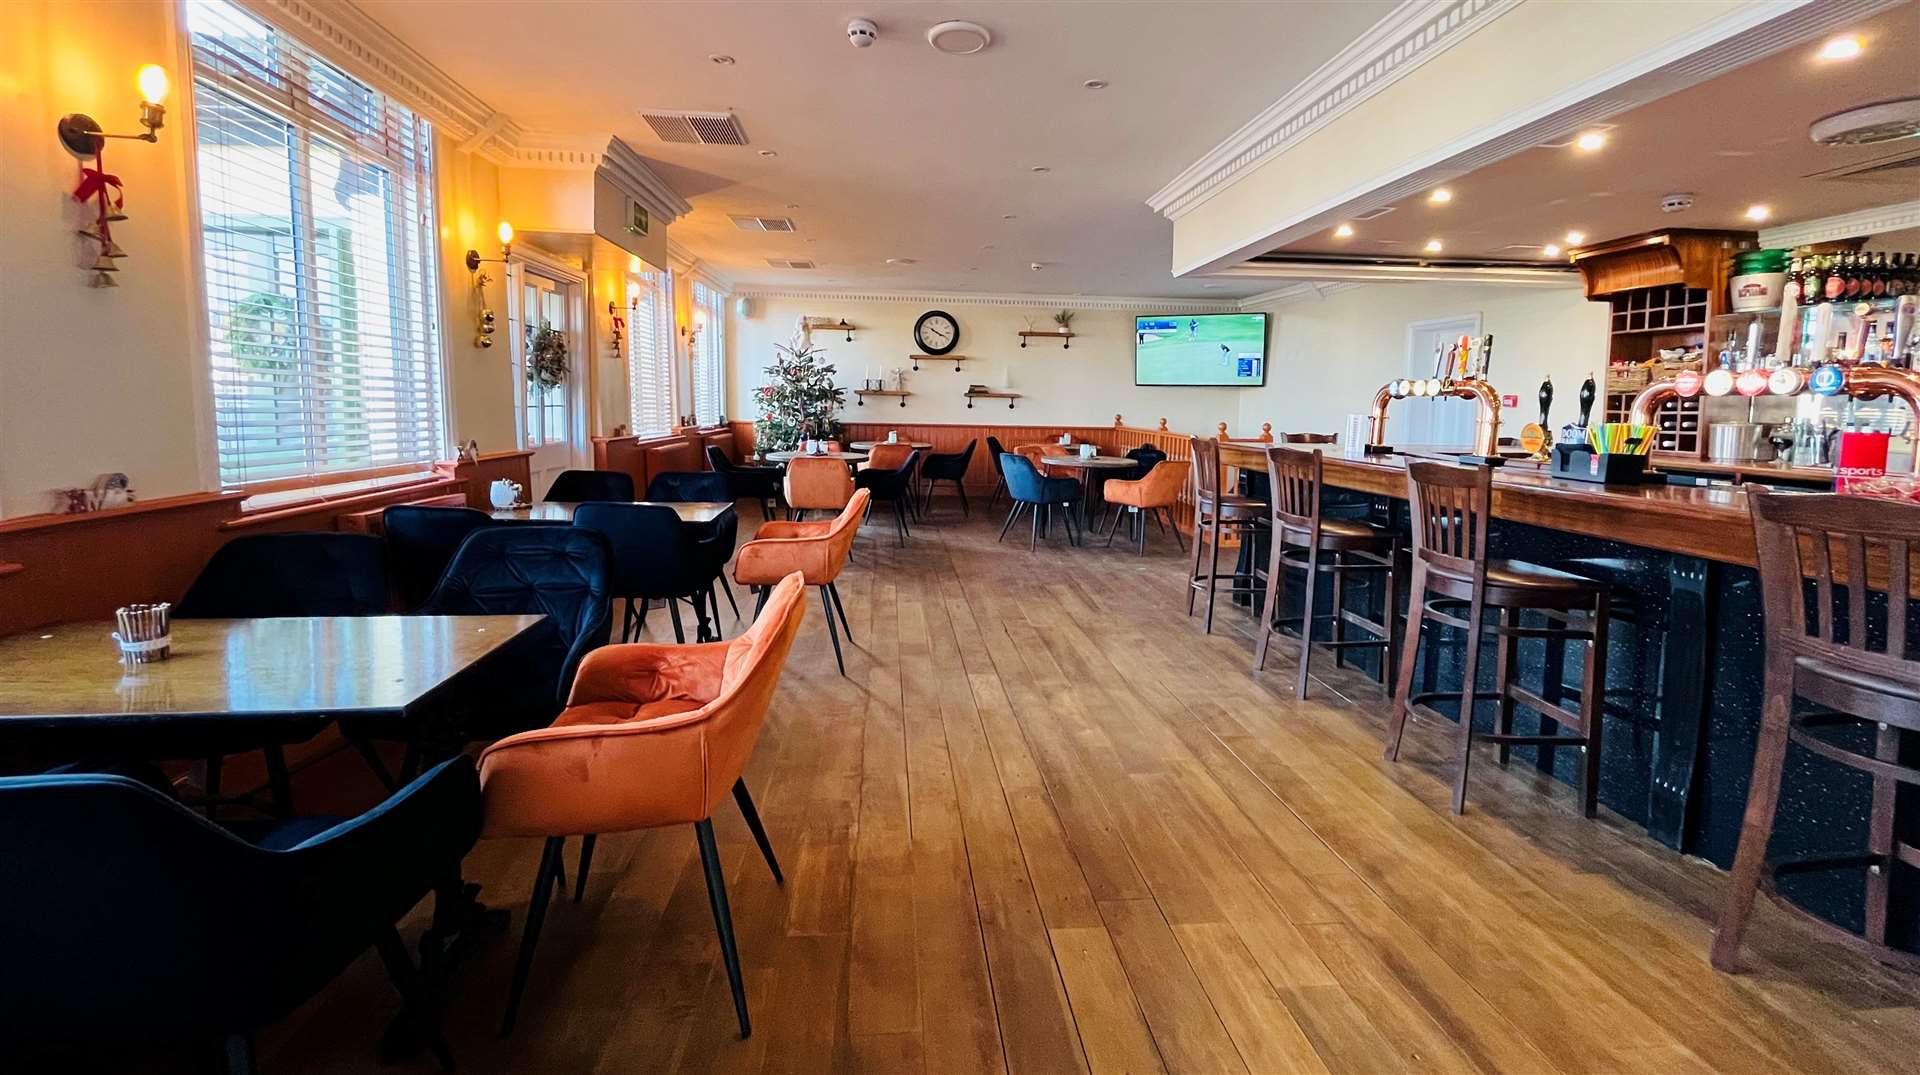 The Captain Howey has been given a revamp, with a new bar and TV screens